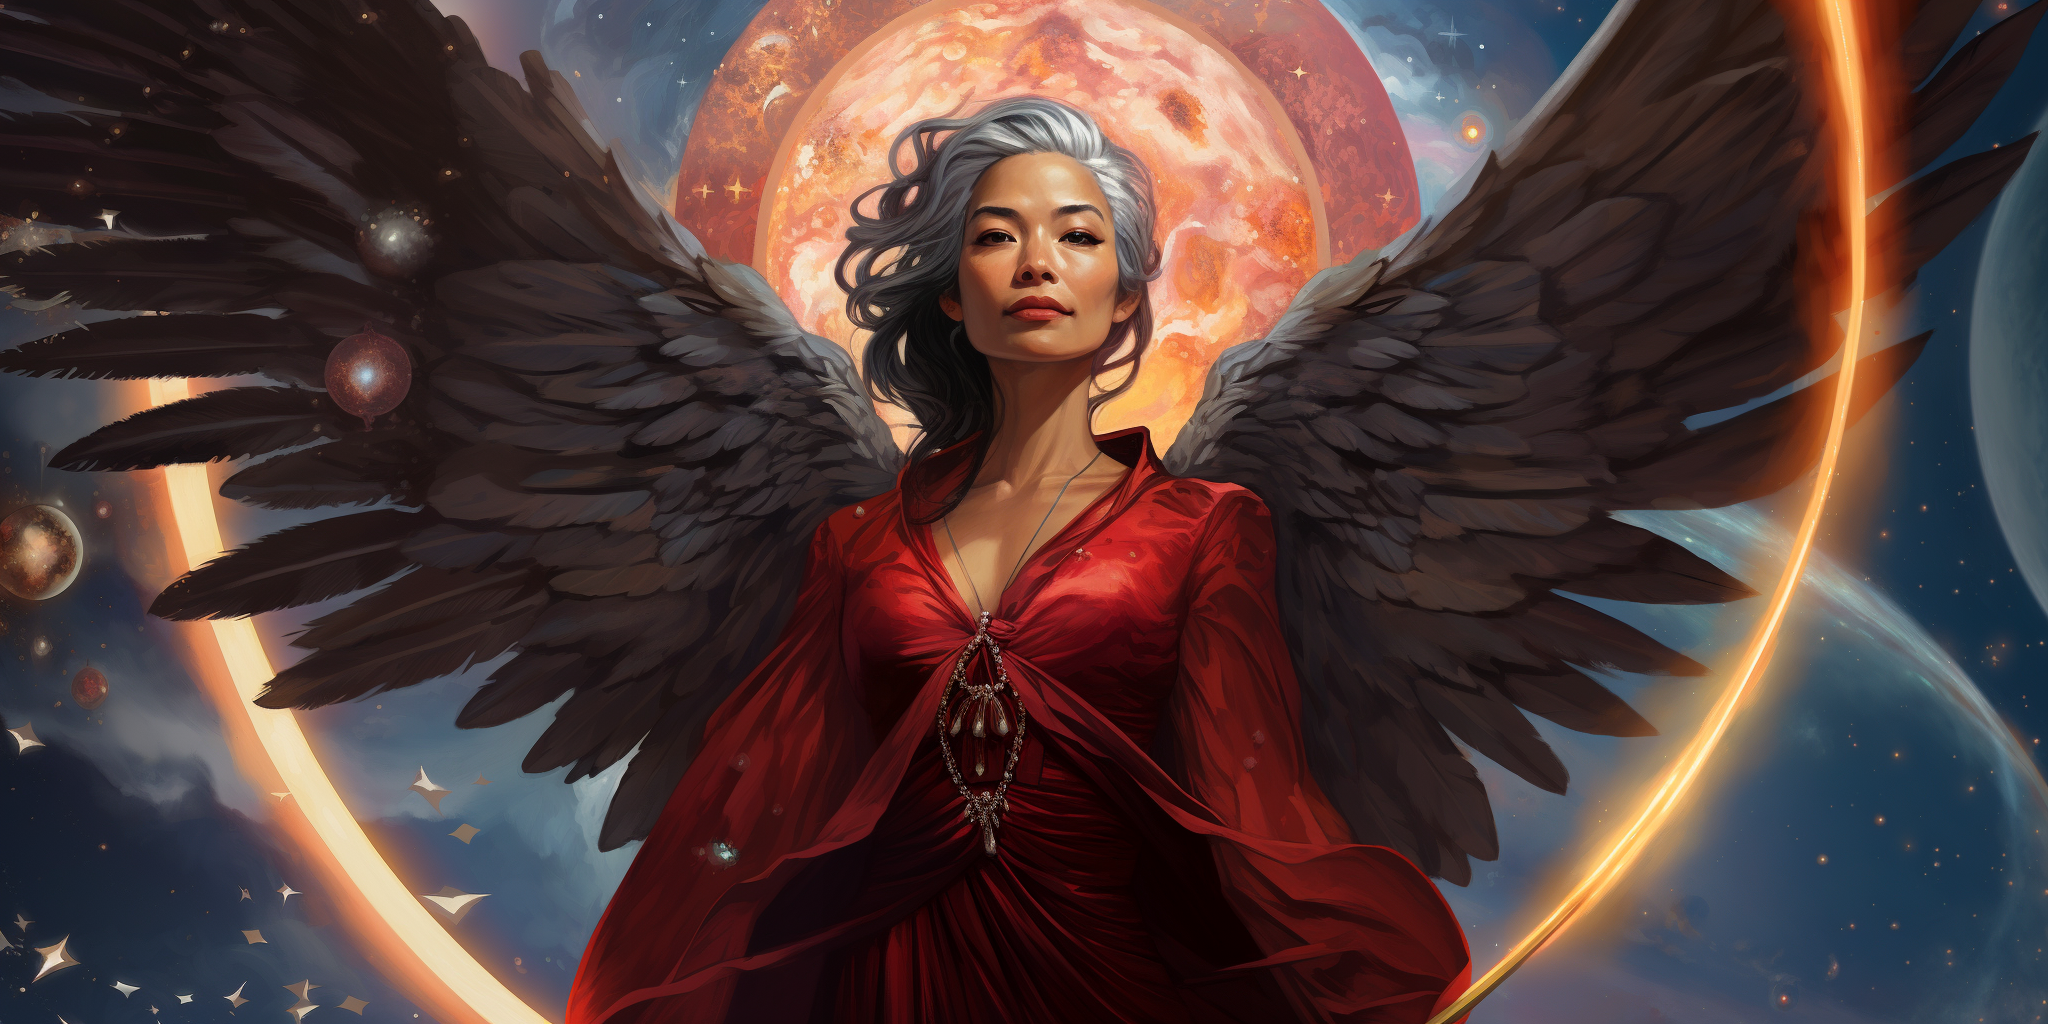 applecider5054_angel_asian_teenager_red_and_silver_wings_illust_be174251-78a8-4388-aa1a-ff62232ea2e4.png